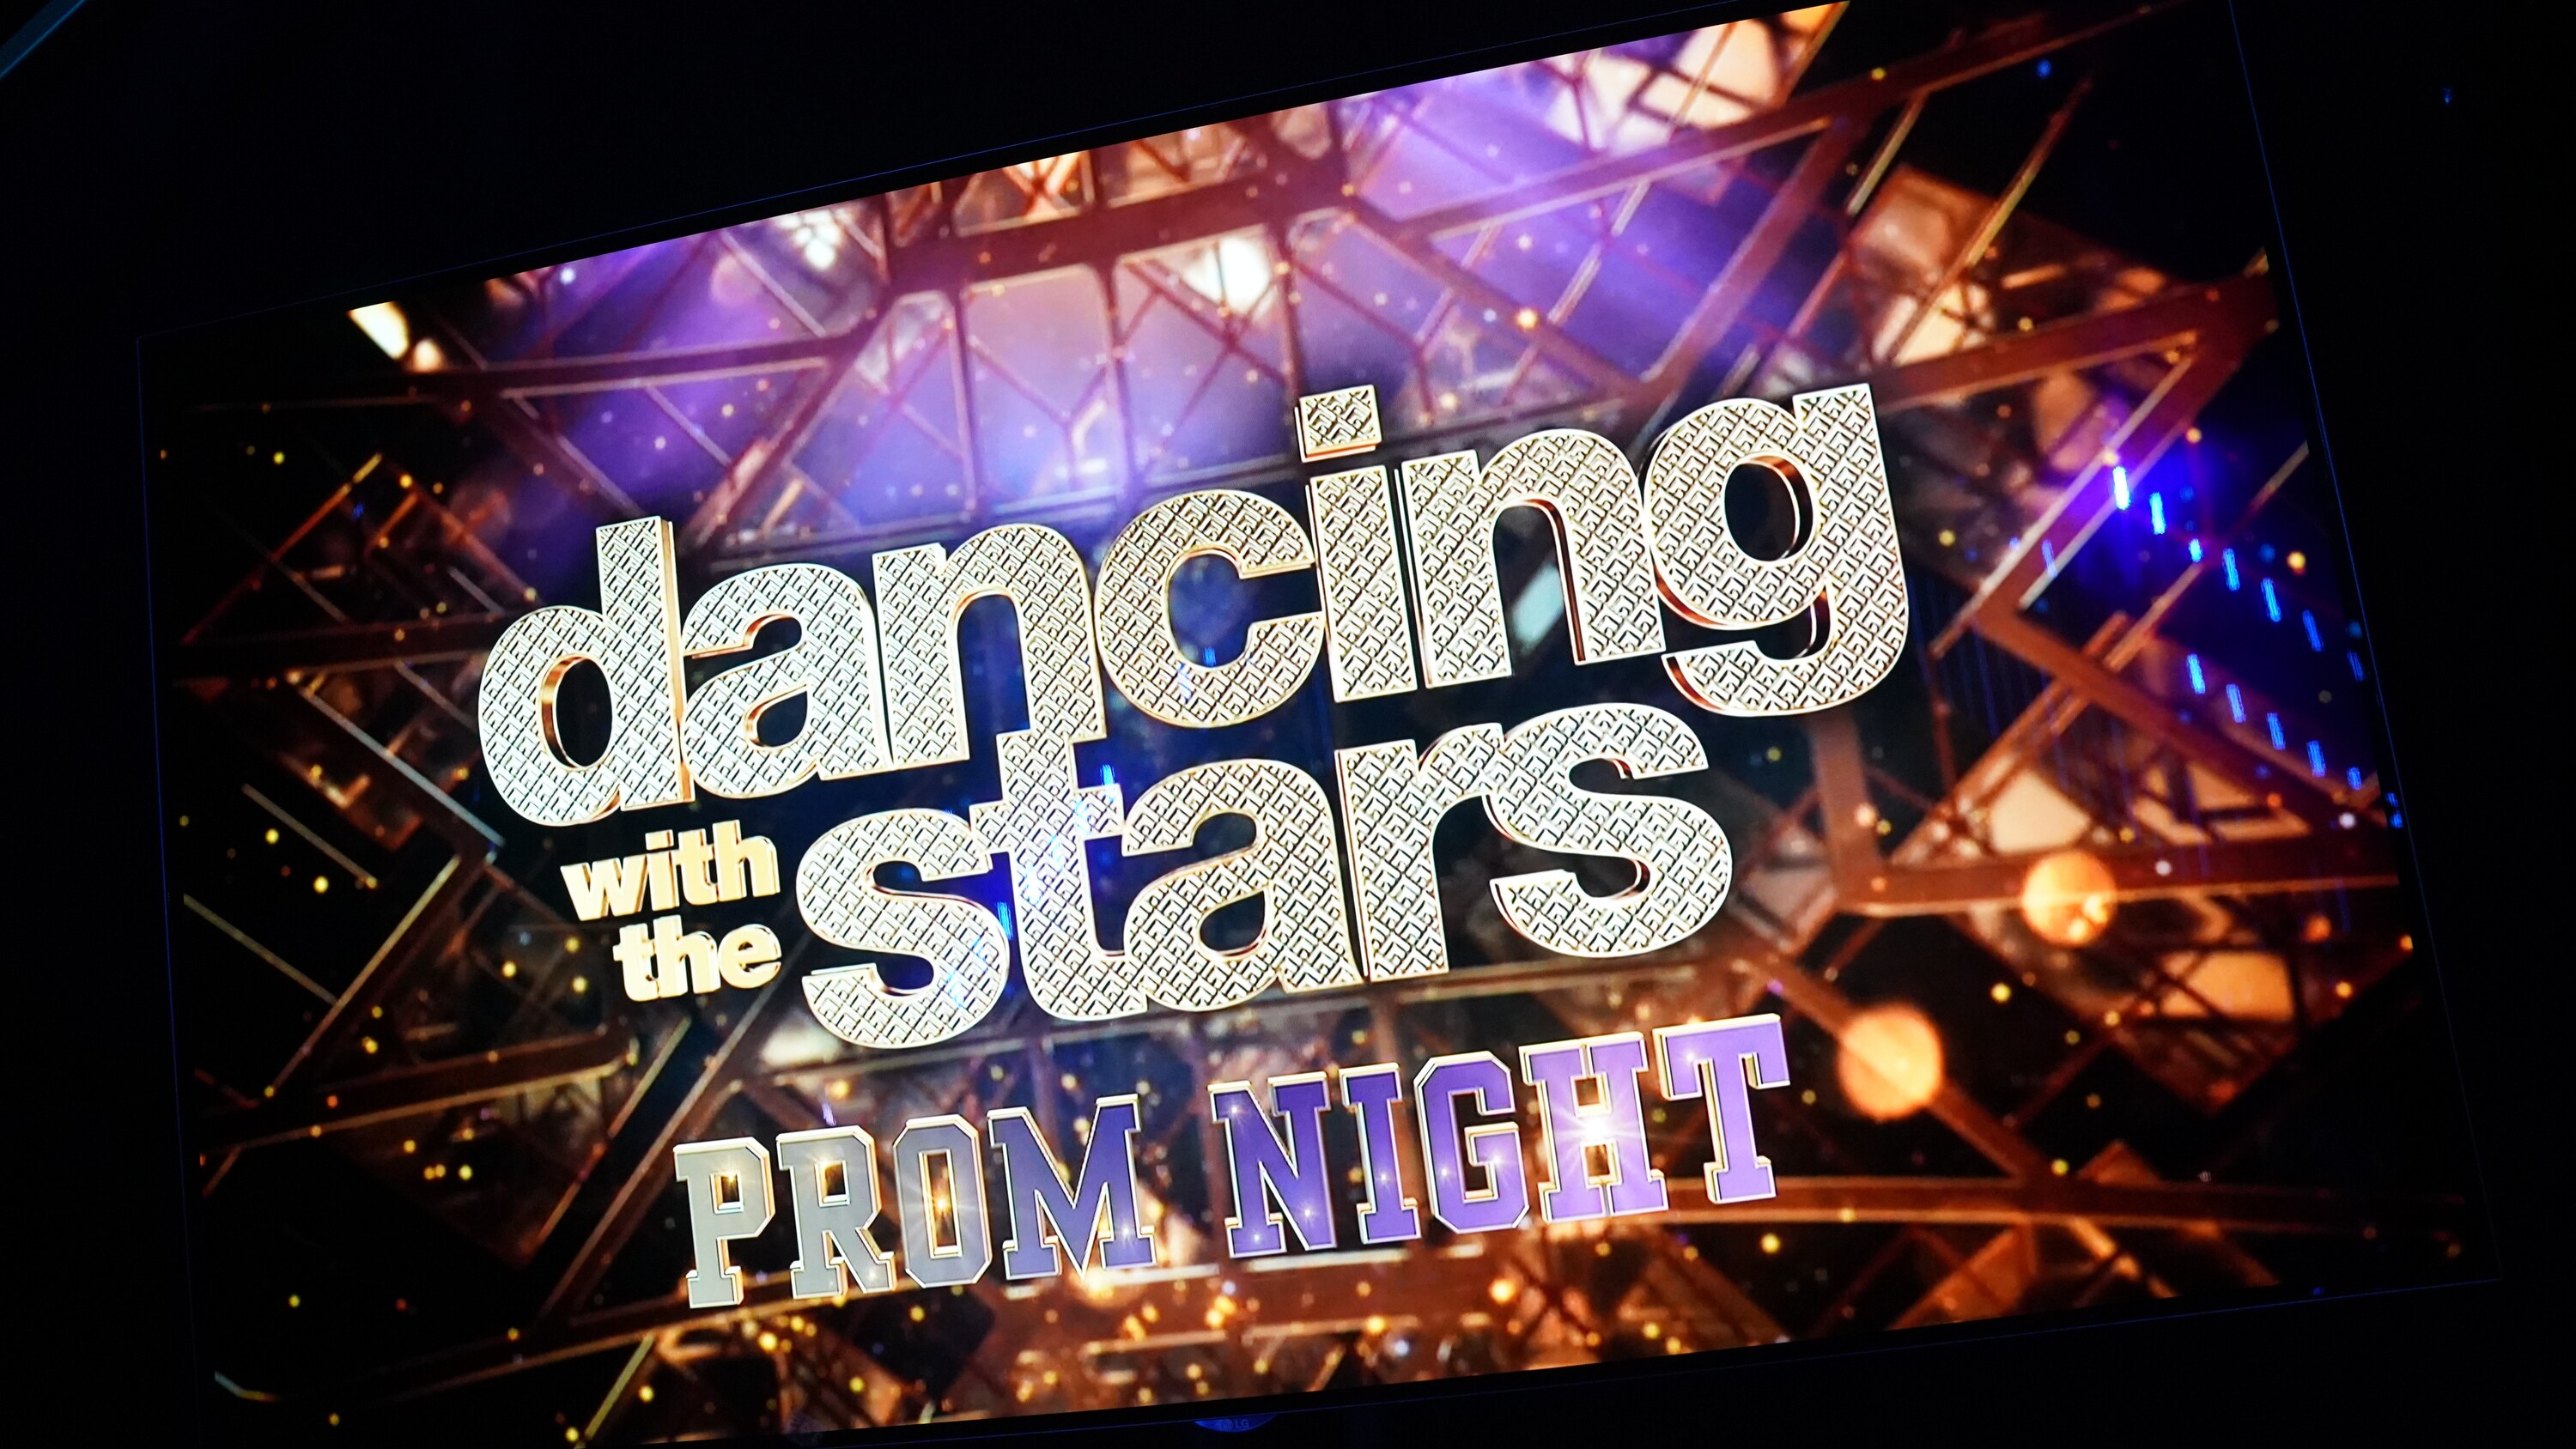 DANCING WITH THE STARS - “Stars' Stories Week: Prom Night” – The two-night event continues with “Prom Night” featuring the 11 remaining couples performing dances to hits that bring them back to their high school proms. An all-new episode of “Dancing with the Stars” will stream live TUESDAY, OCT. 18 (8:00pm ET / 5:00pm PT), on Disney+. (TV-PG, L) Watch episode replays on Disney+ within the hour following the livestream.  (ABC/Eric McCandless) DANCING WITH THE STARS